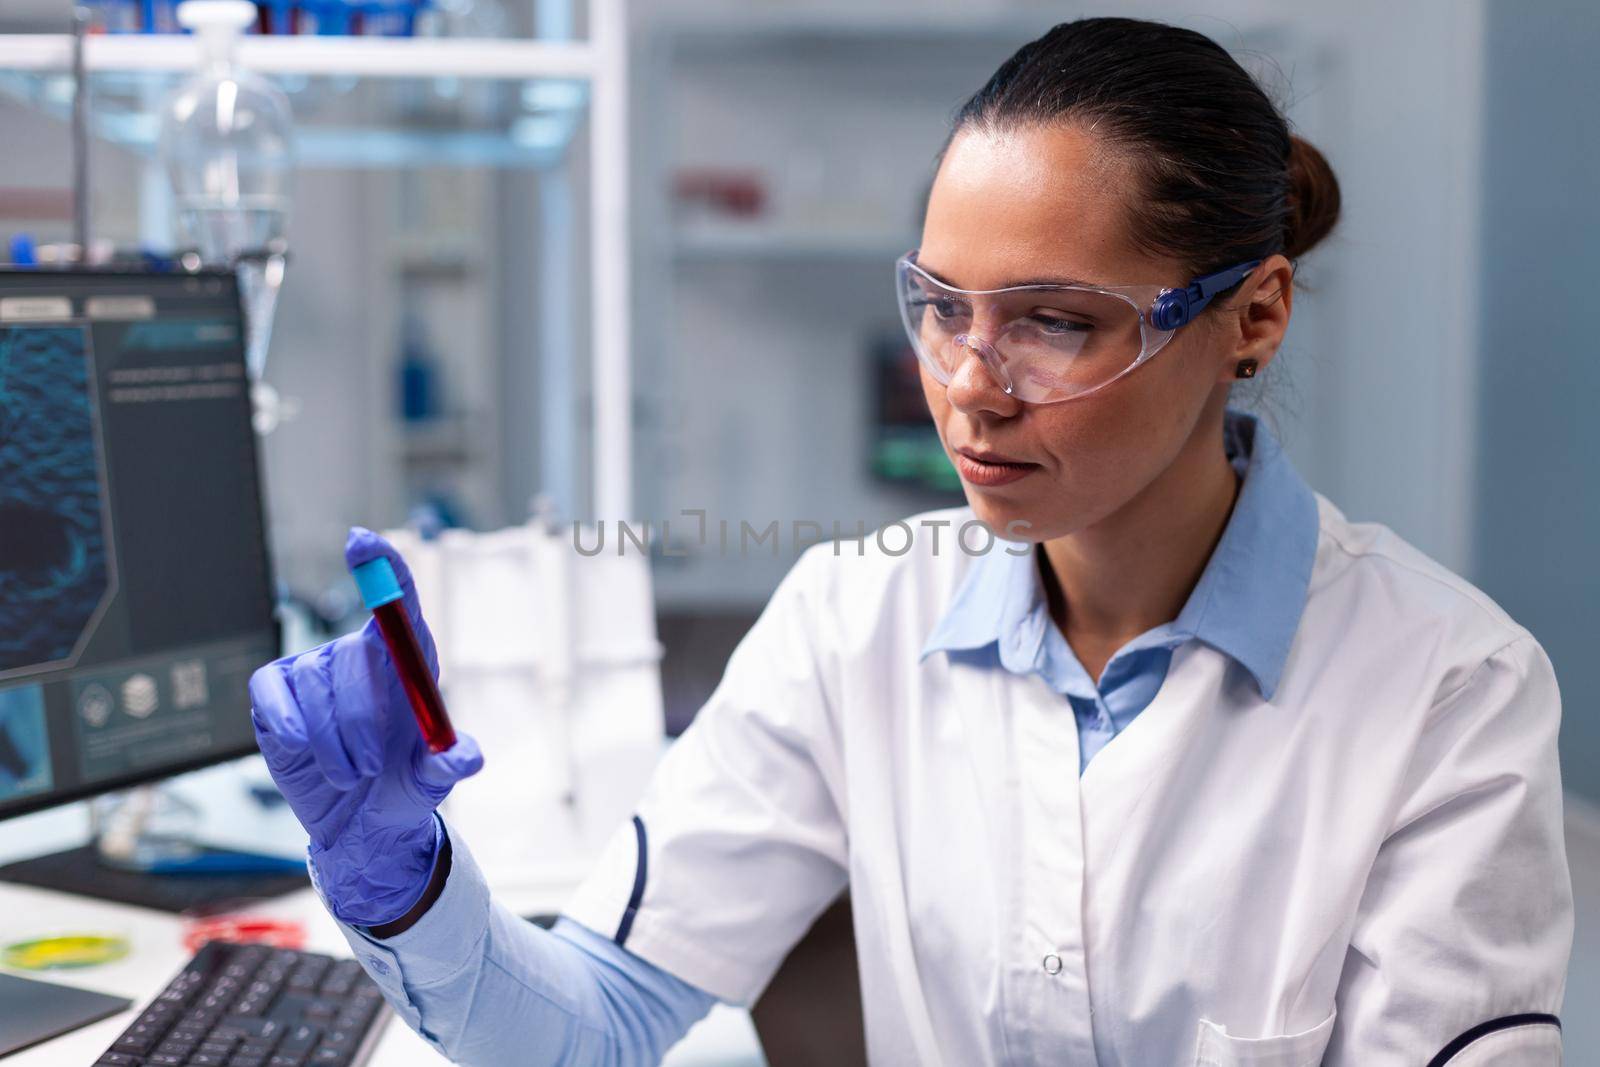 Specialist chemist looking at medical vacutainer with blood analyzing microbiology clinical expertise. Researcher woman doctor discovering illness infection working in hospital laboratory